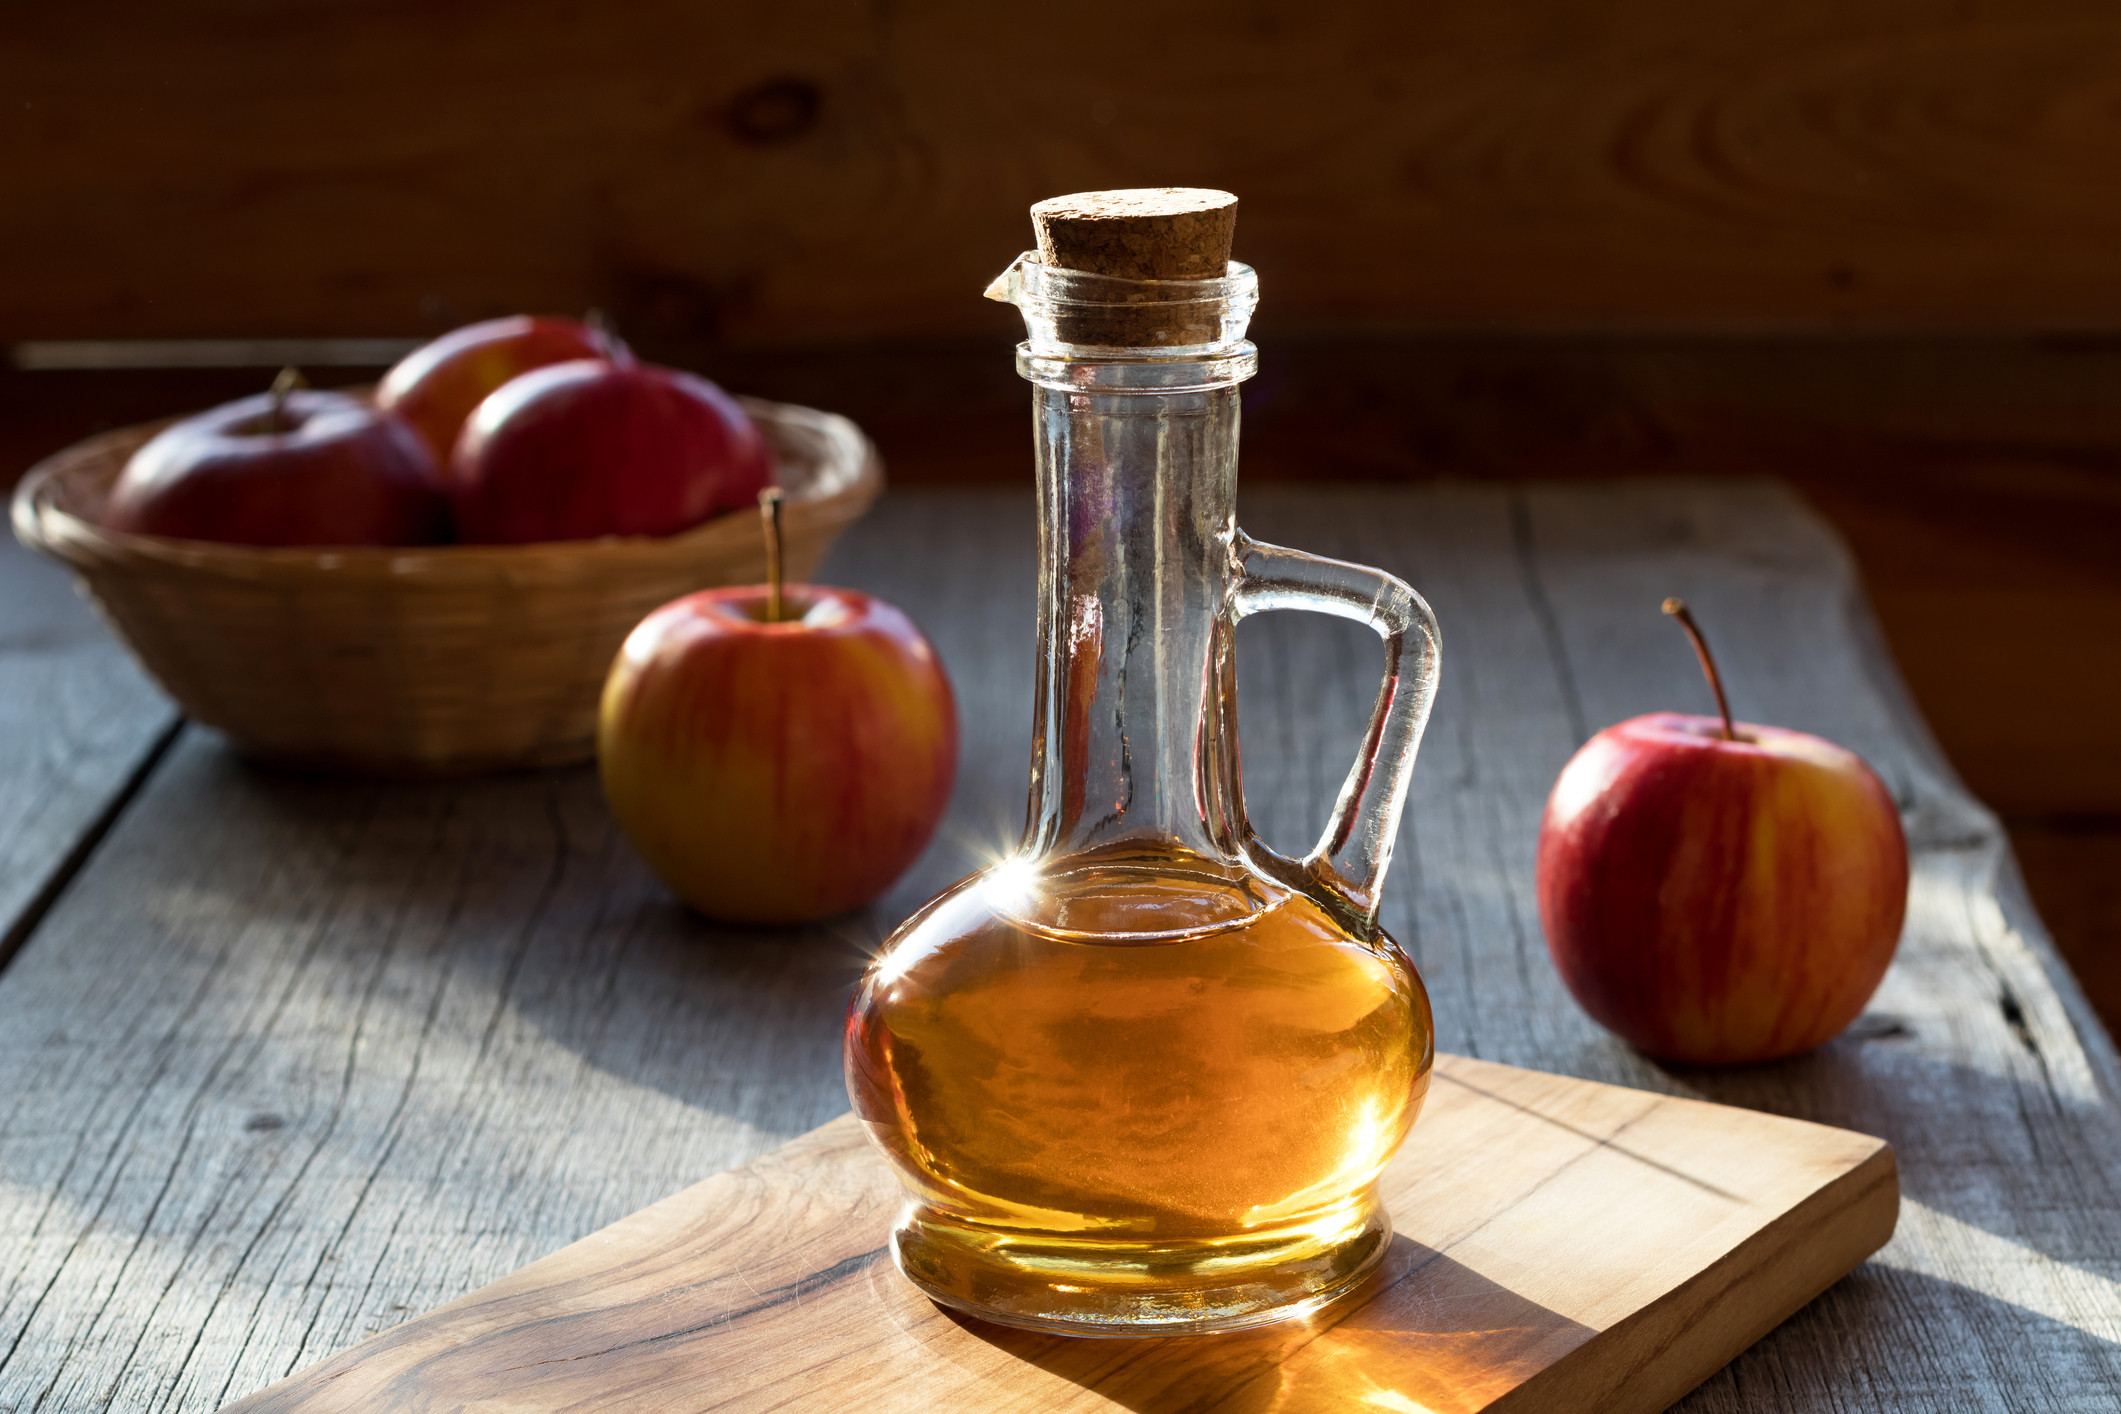 A bottle of apple cider vinegar in the morning sun, with apples in the background.